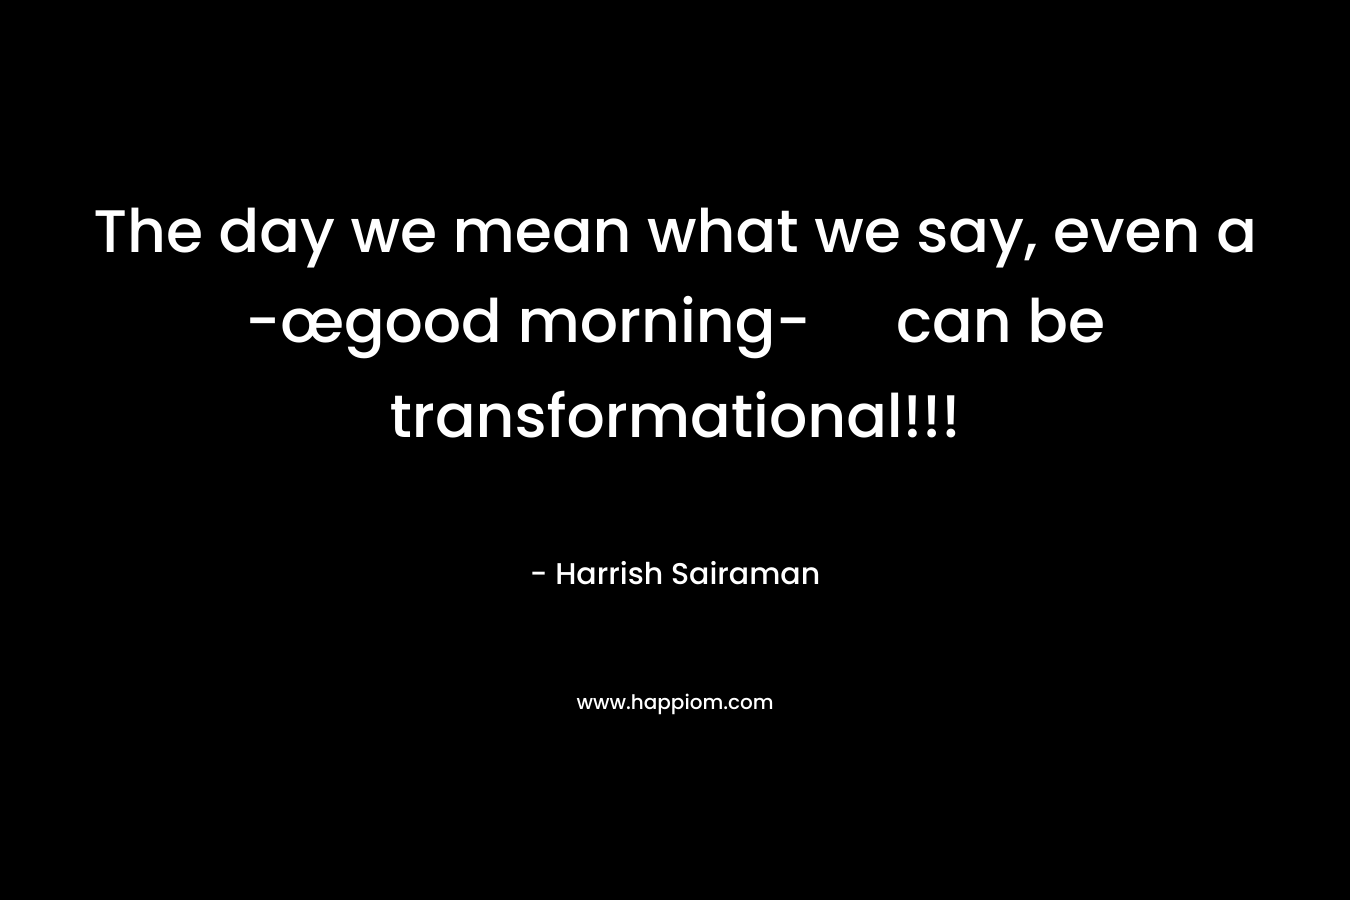 The day we mean what we say, even a -œgood morning- can be transformational!!! – Harrish Sairaman